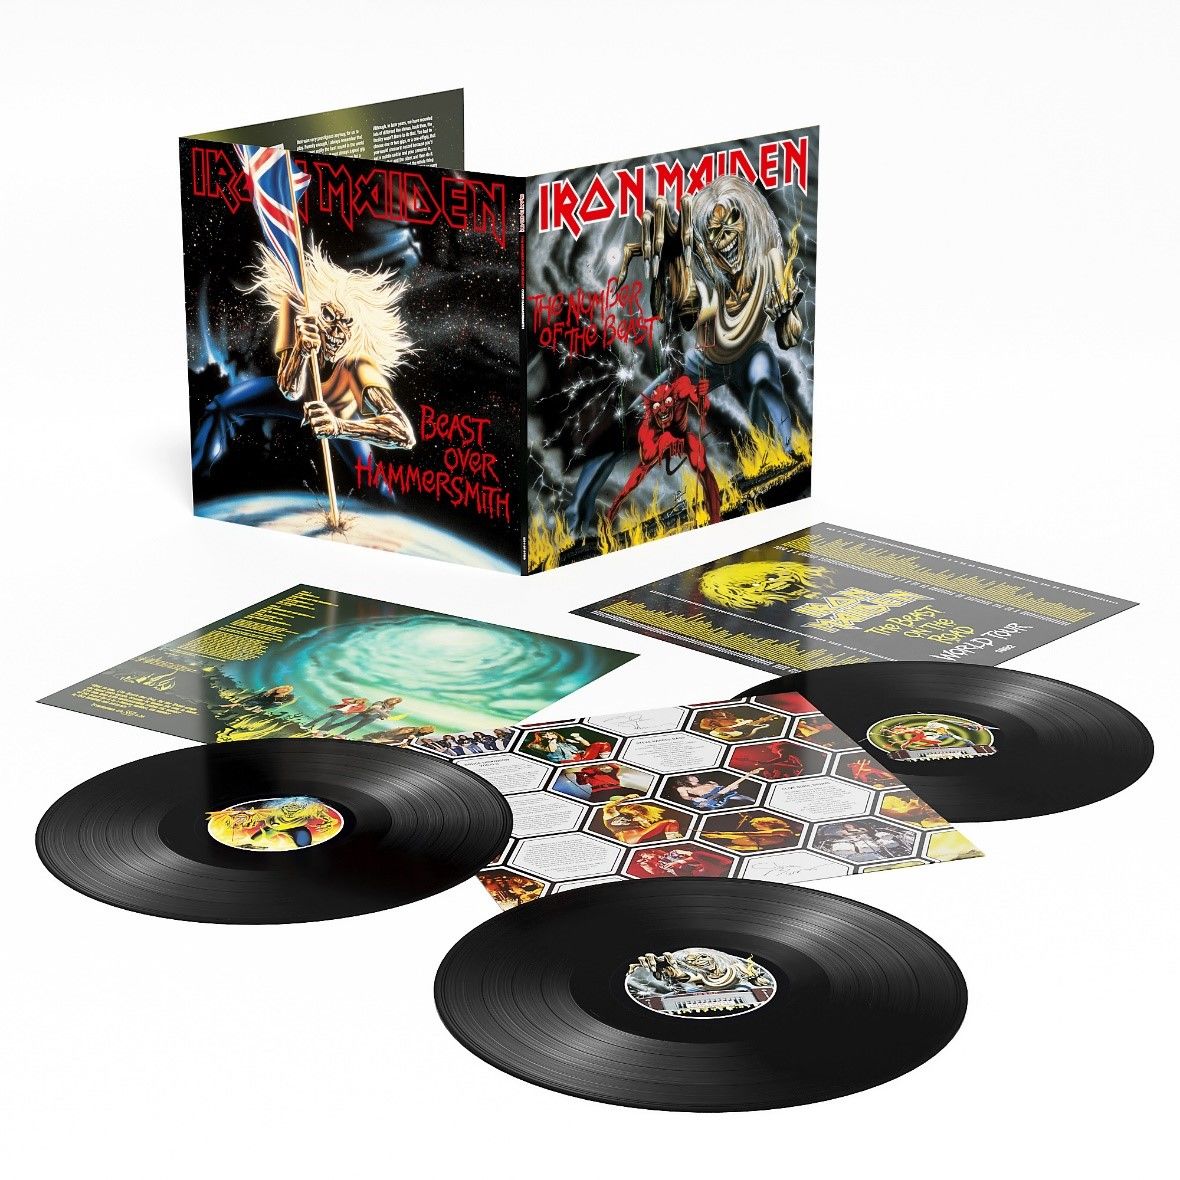 Iron Maiden - The Number of The Beast Plus Beast Over Hammersmith: Limited Edition Vinyl 3LP